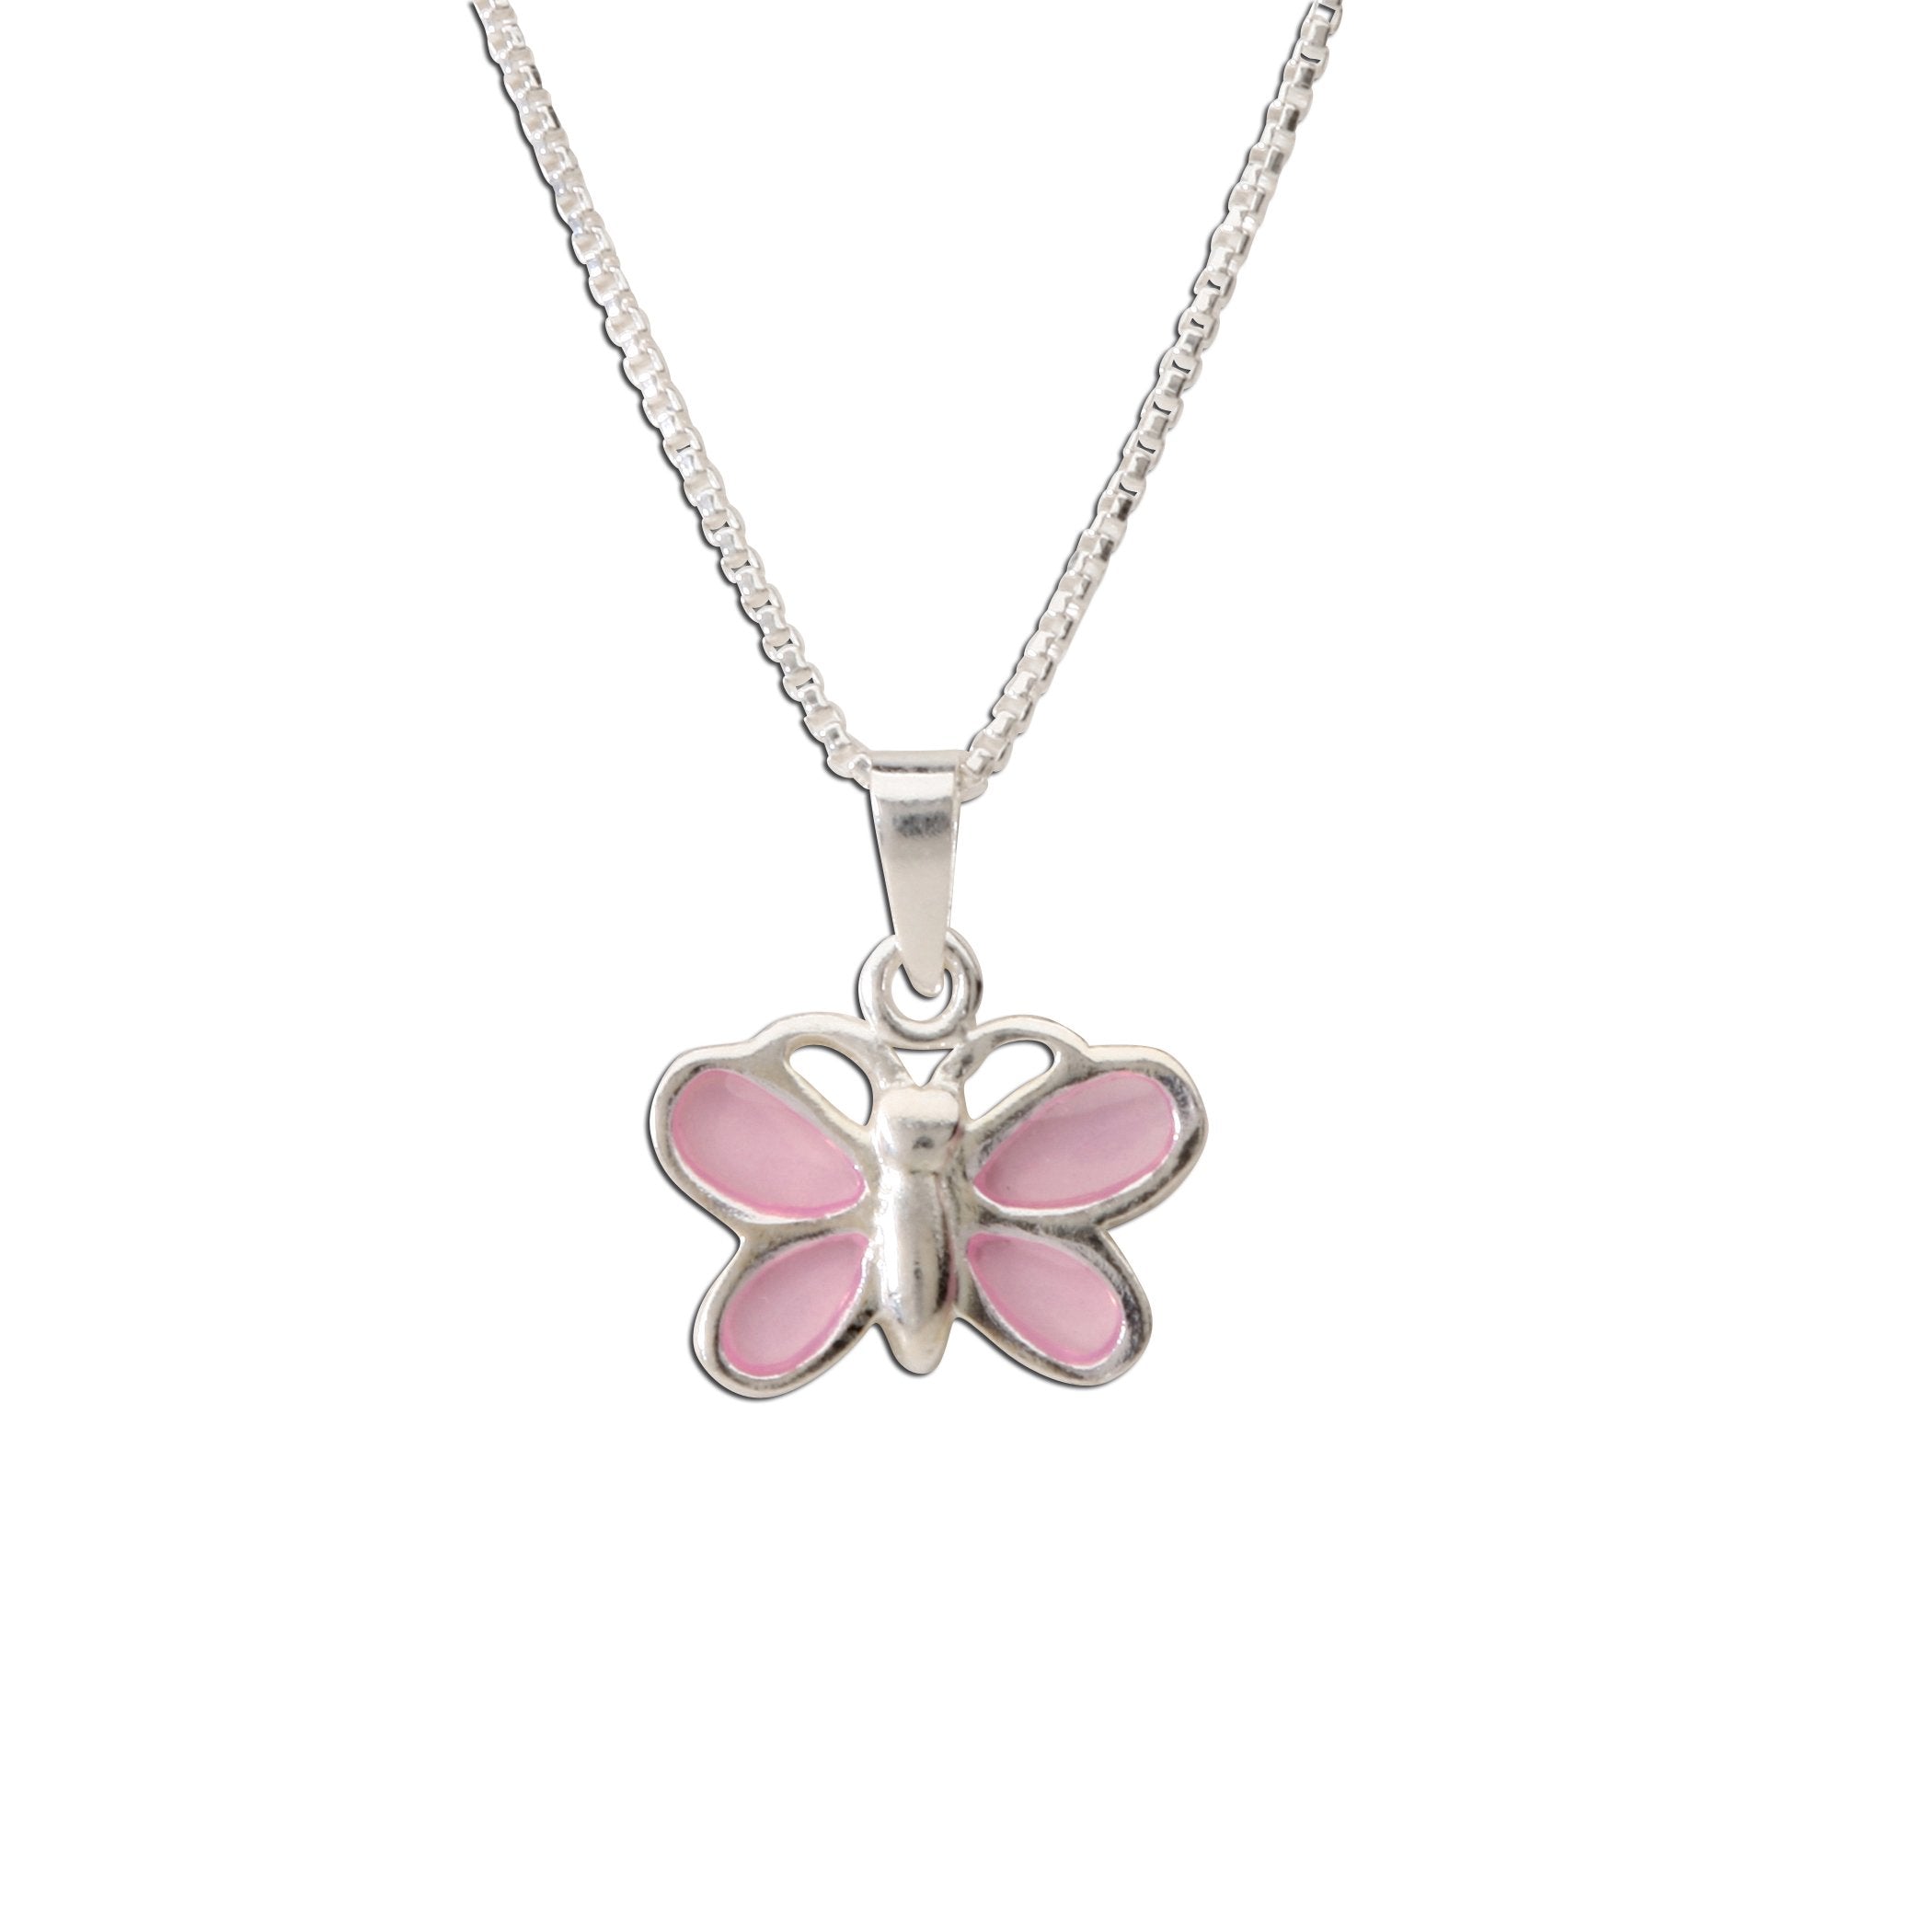 Cherished Moments - Sterling Silver Children's Necklaces